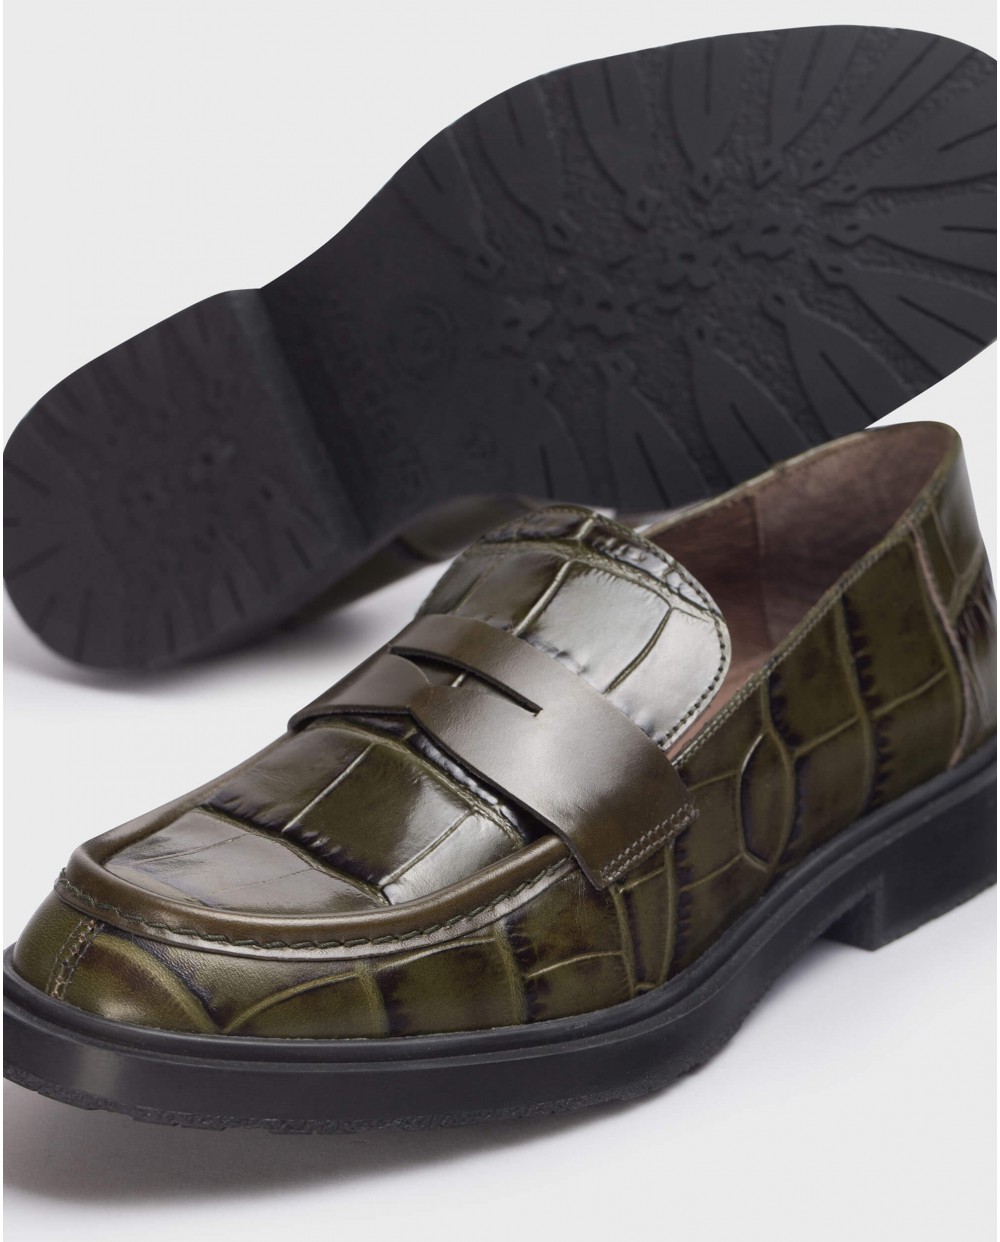 Wonders-Loafers-Green Ned Croc Moccasin